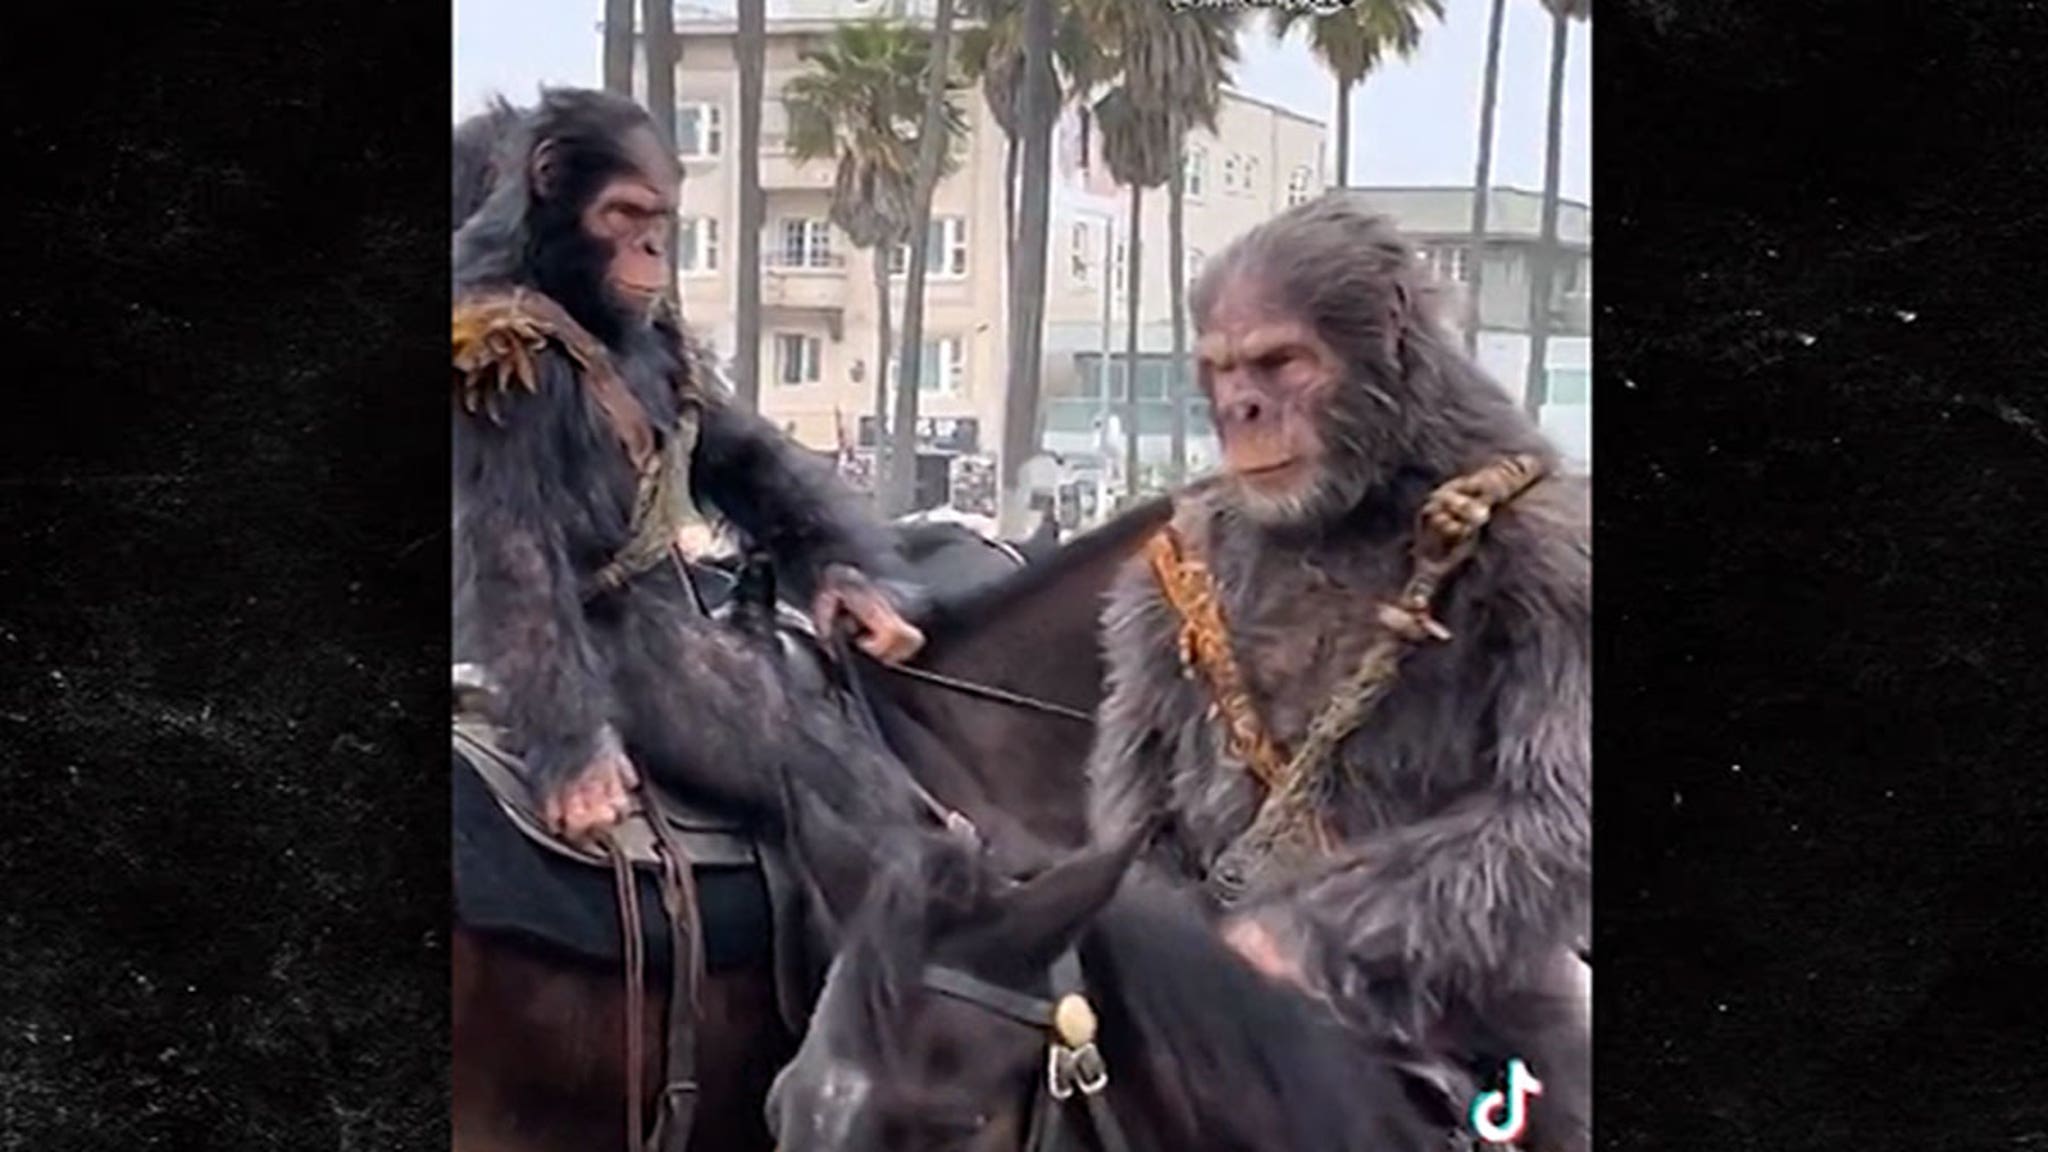 ‘Apes’ Hit Venice Beach on Horseback for New ‘Planet of the Apes’ Promo